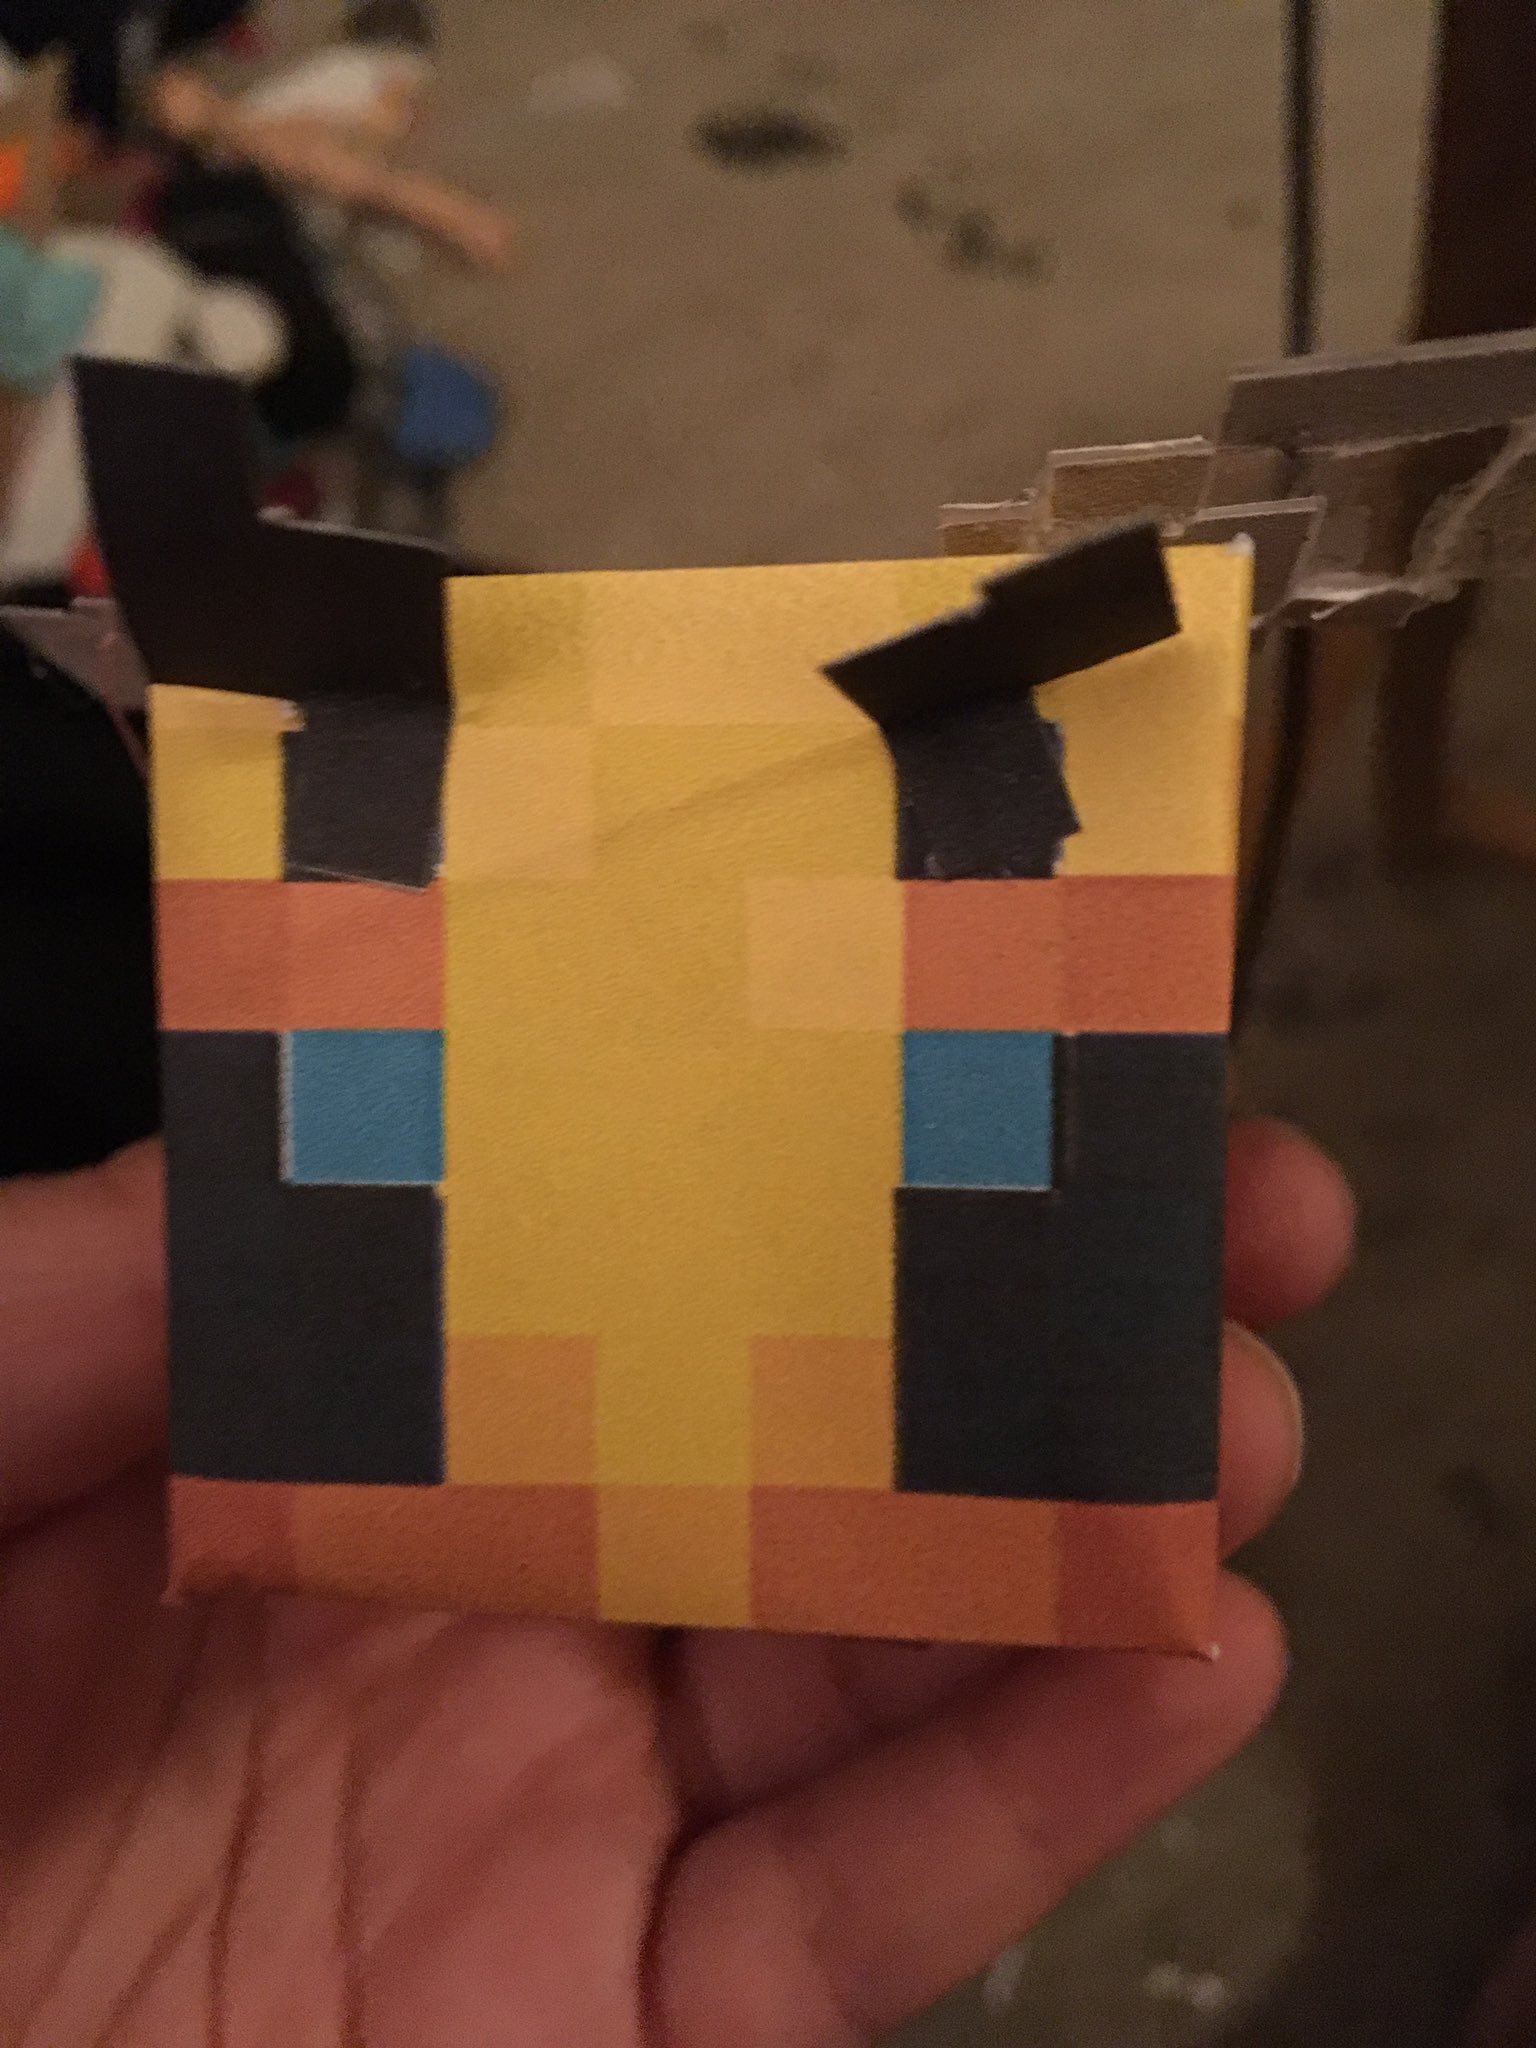 Why do they call it oven if you of in- on X: *Hands you a badly made minecraft  bee with messed up wings* I gave up near the end because sleepy, but